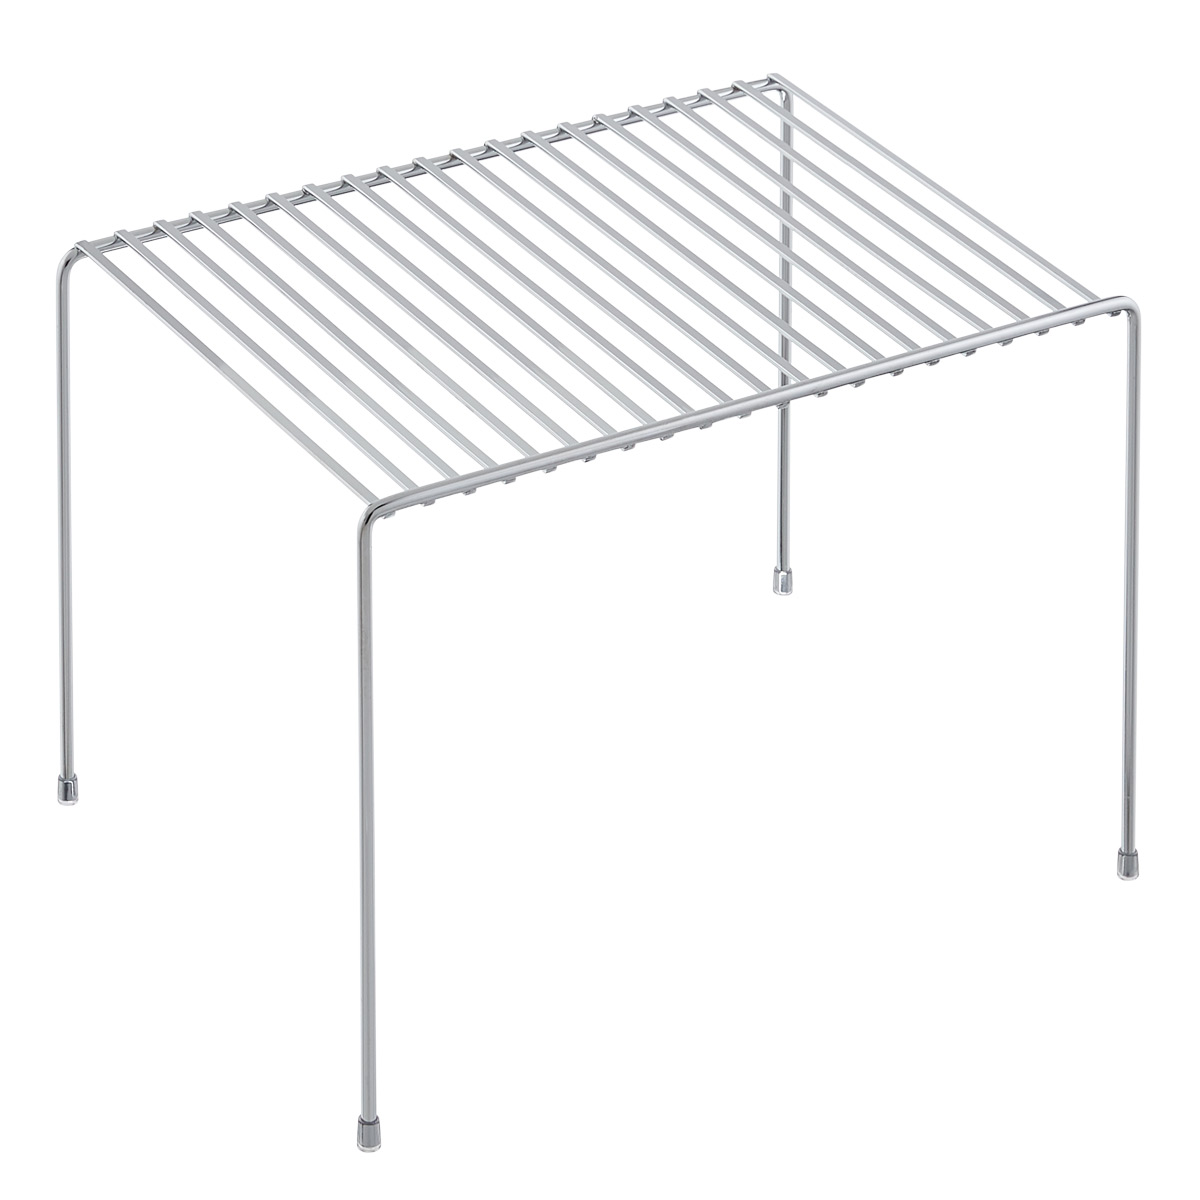 https://images.containerstore.com/catalogimages?sku=10032868